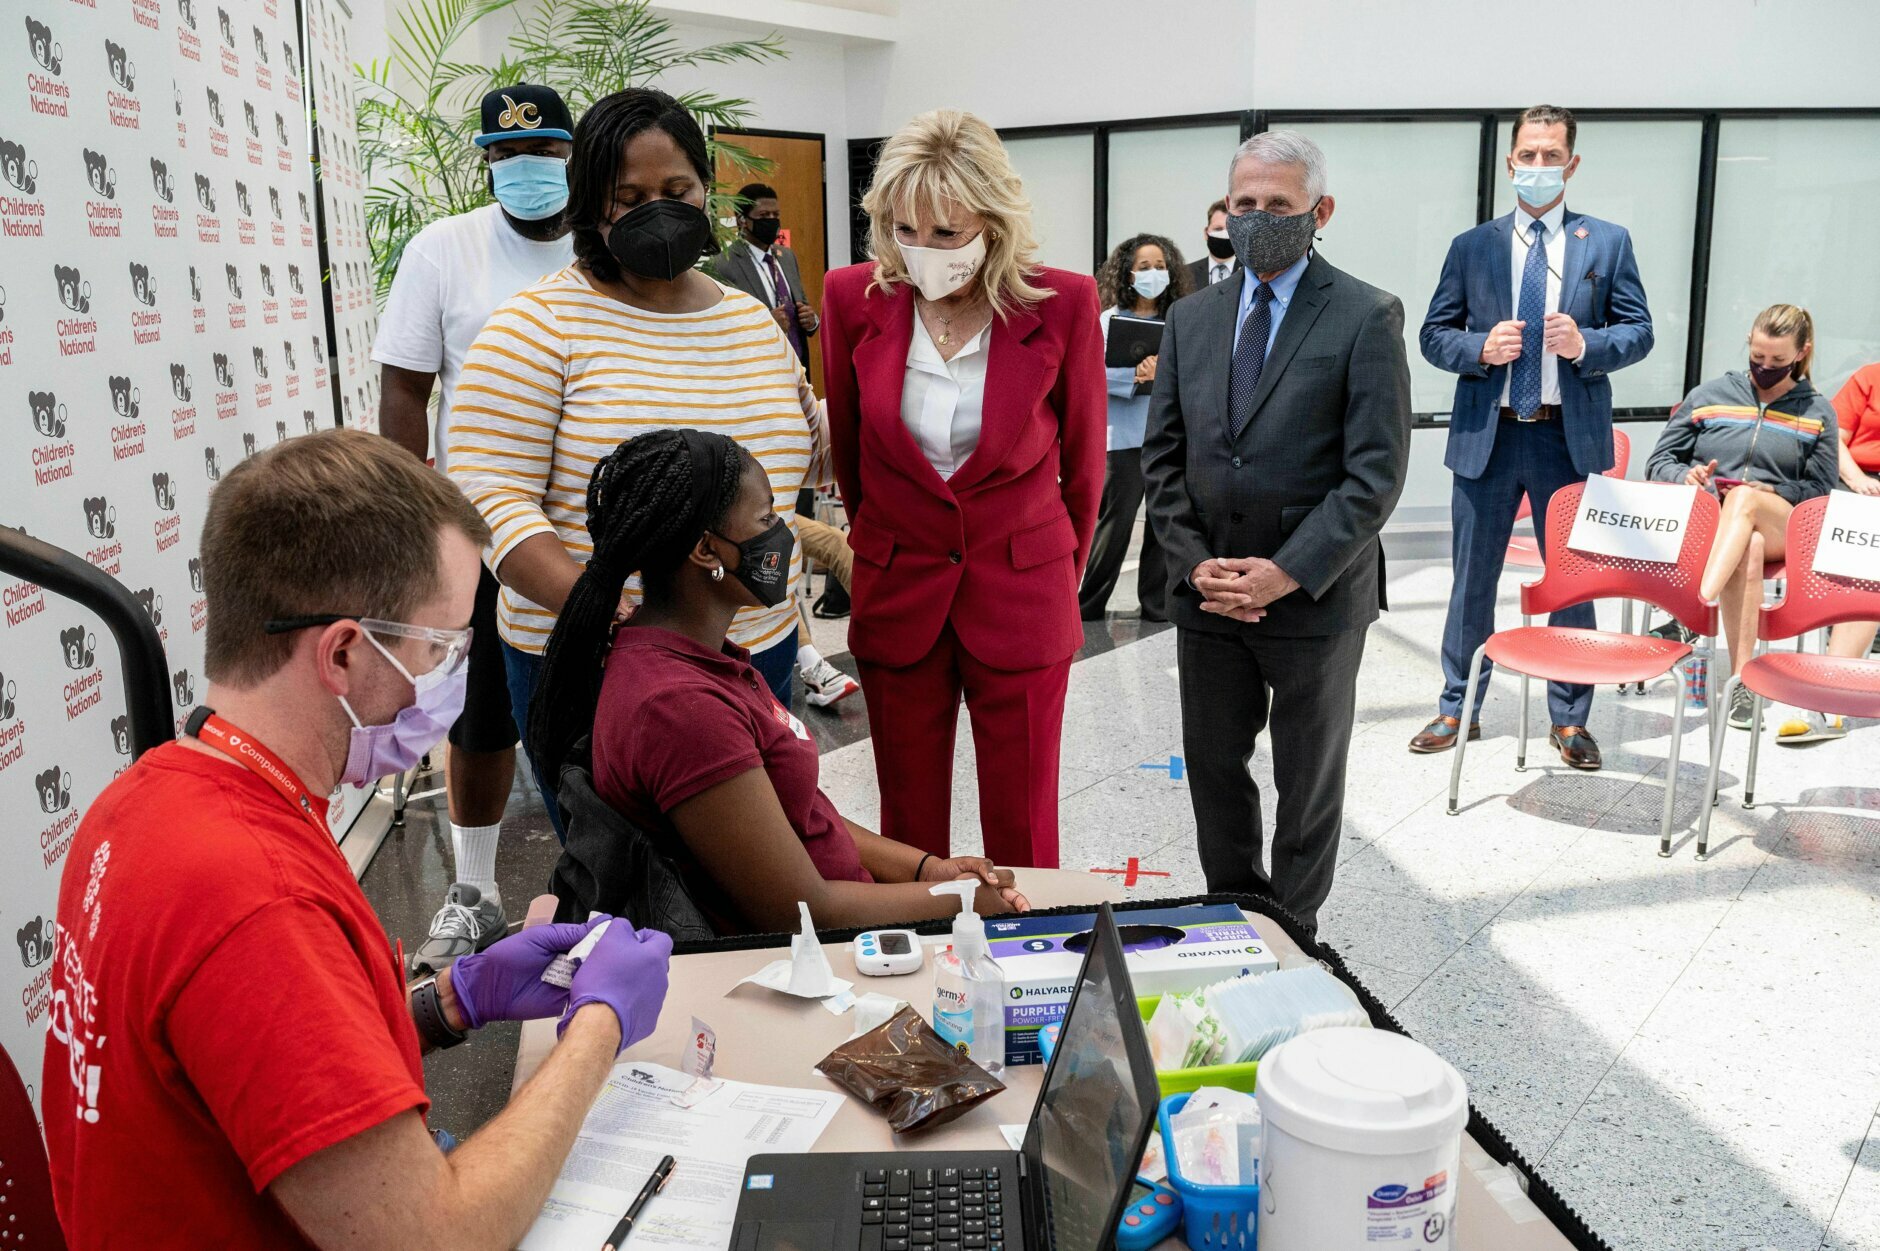 US First Lady Jill Biden (C) and Dr. Anthony Fauci (3rd R) speak with Skylah Jacksons (3rd L) family before her first Covid-19 vaccination in the vaccination center at the Children's National Hospital in Washington, DC on May 20, 2021. (Photo by JIM WATSON / AFP) (Photo by JIM WATSON/AFP via Getty Images)